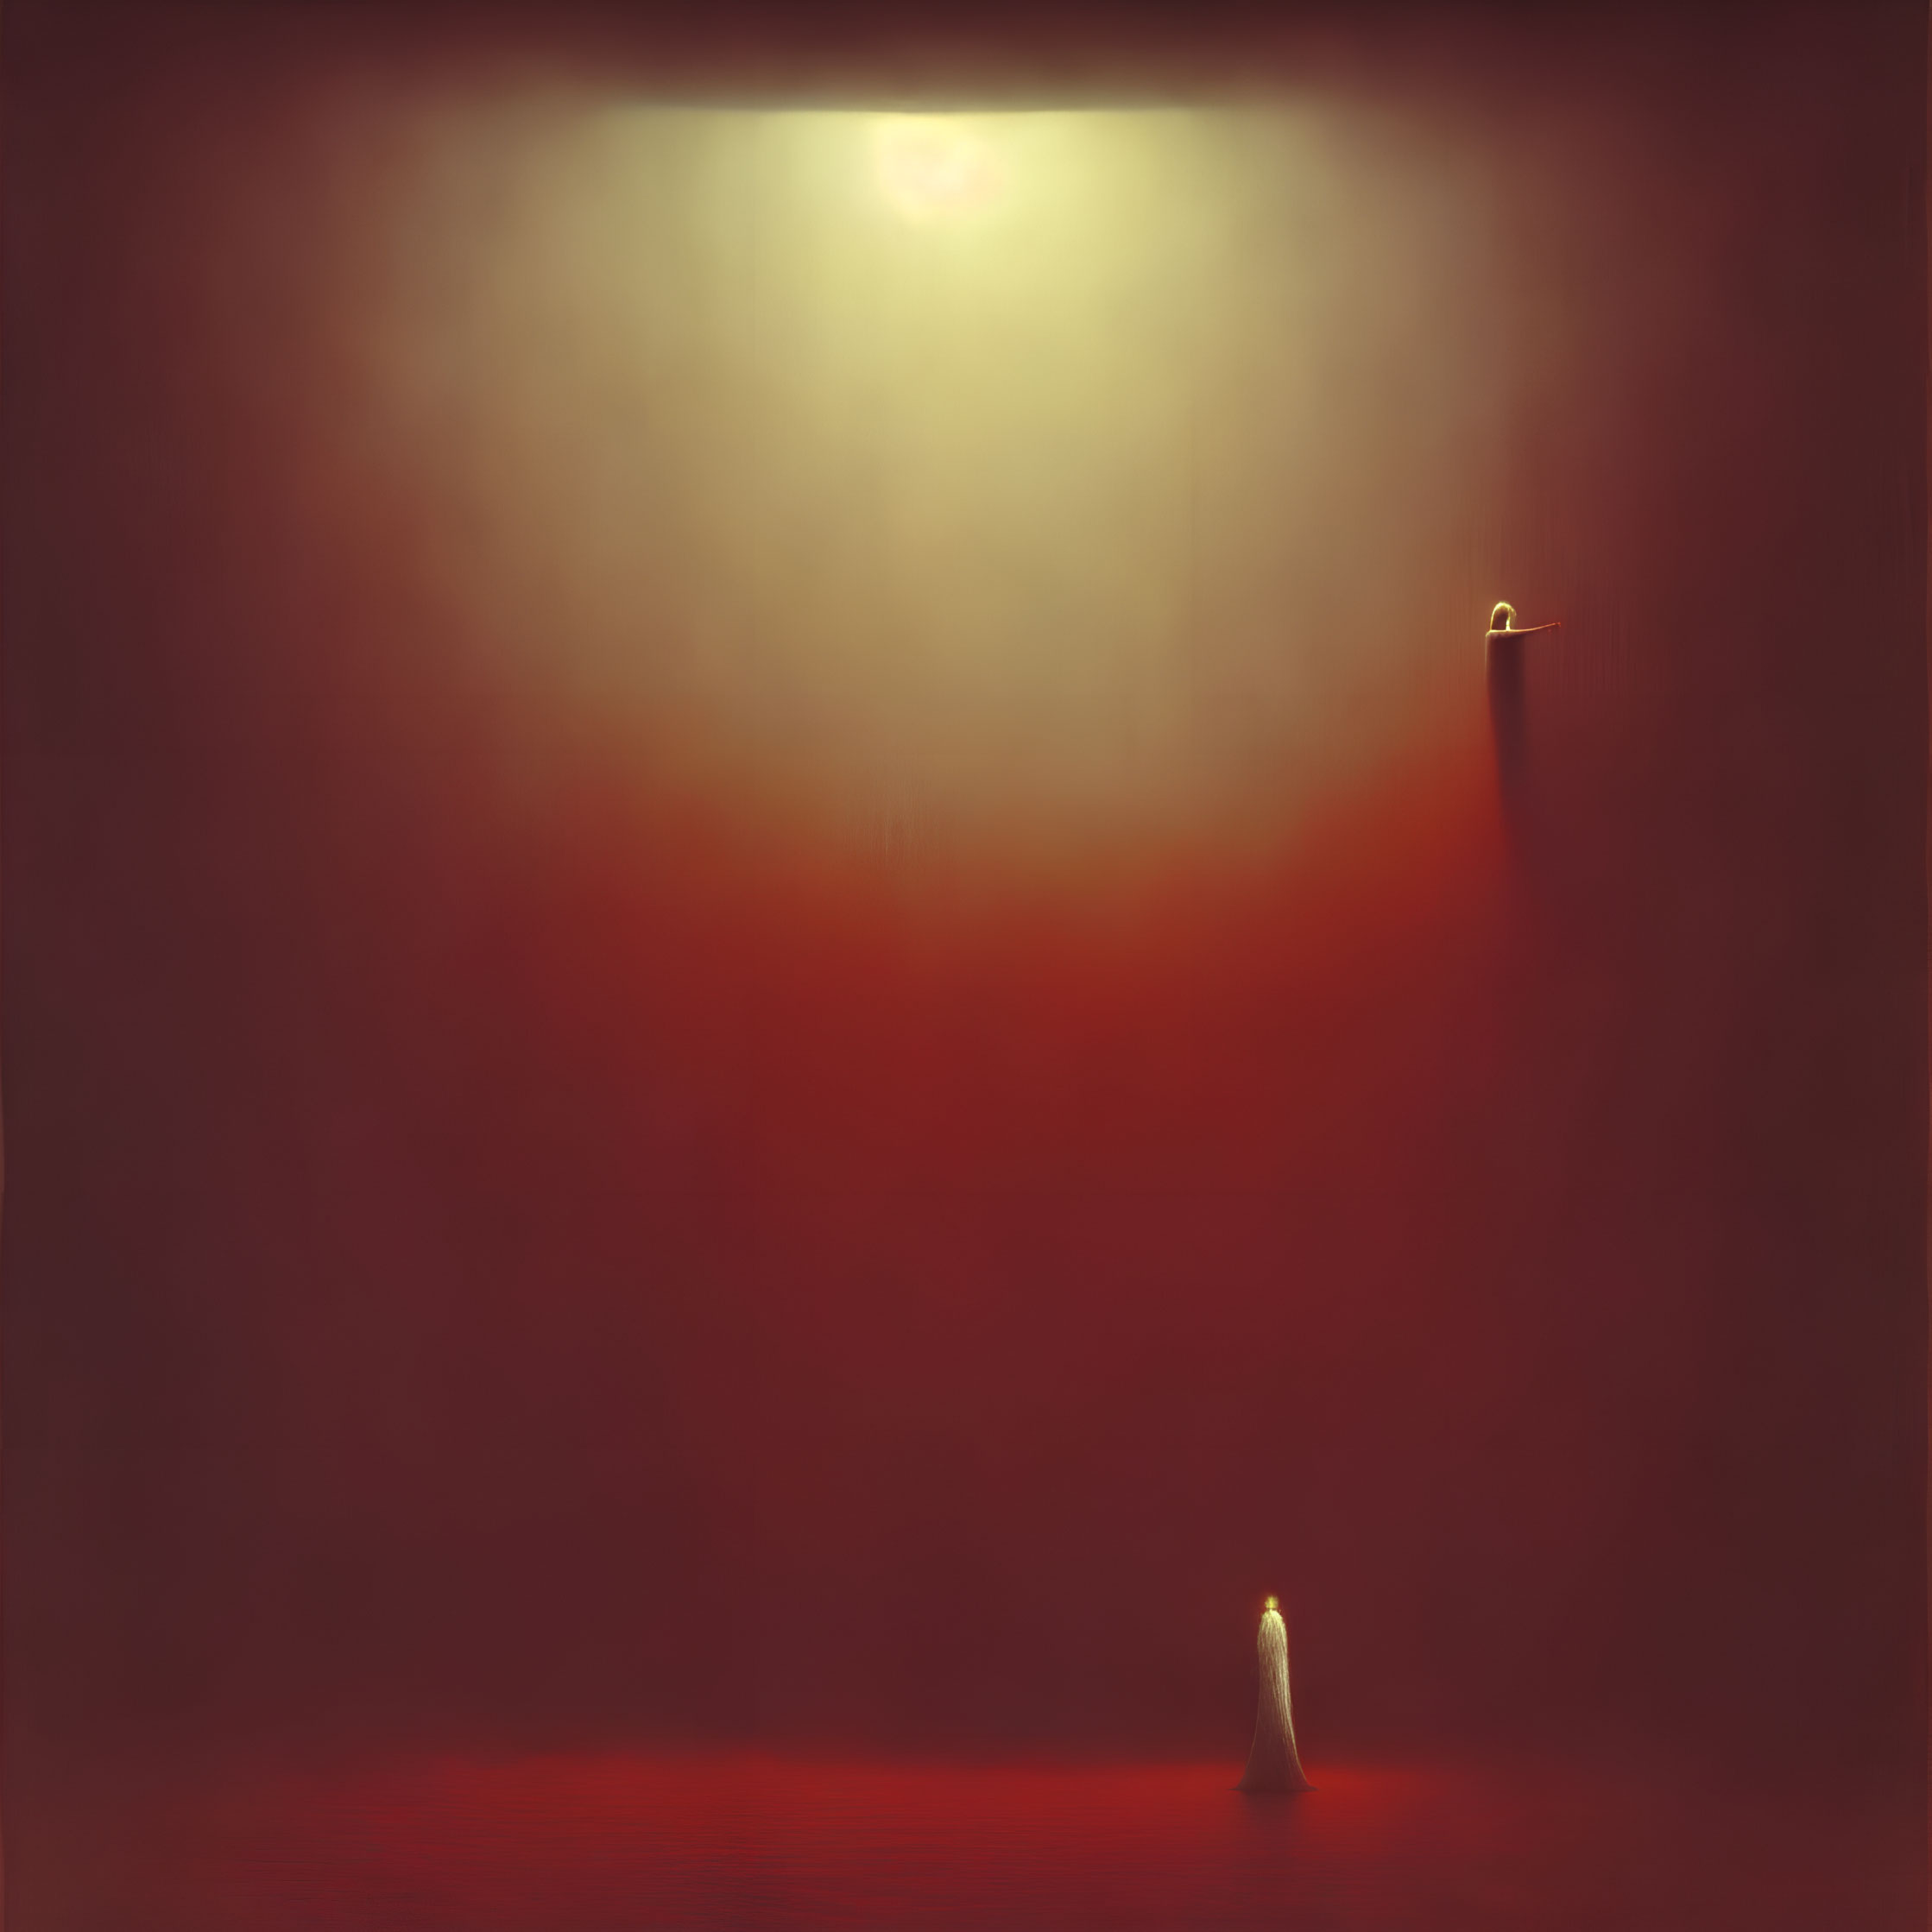 Solitary figure in white garment under bright orb in red haze with lamp post